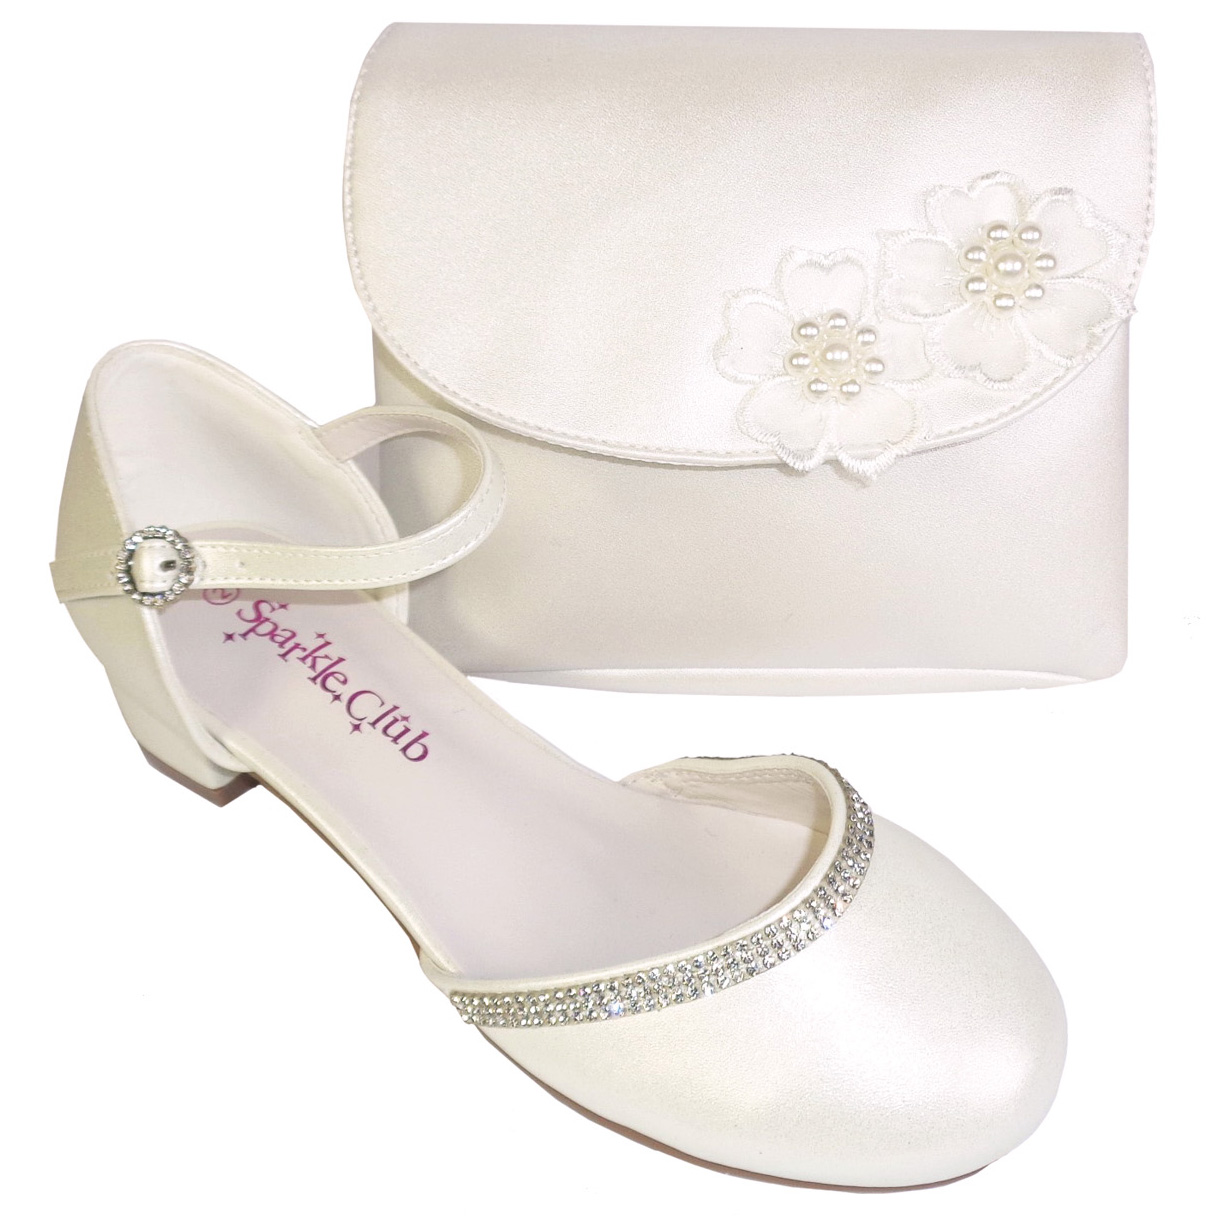 Girls ivory shoes and bag